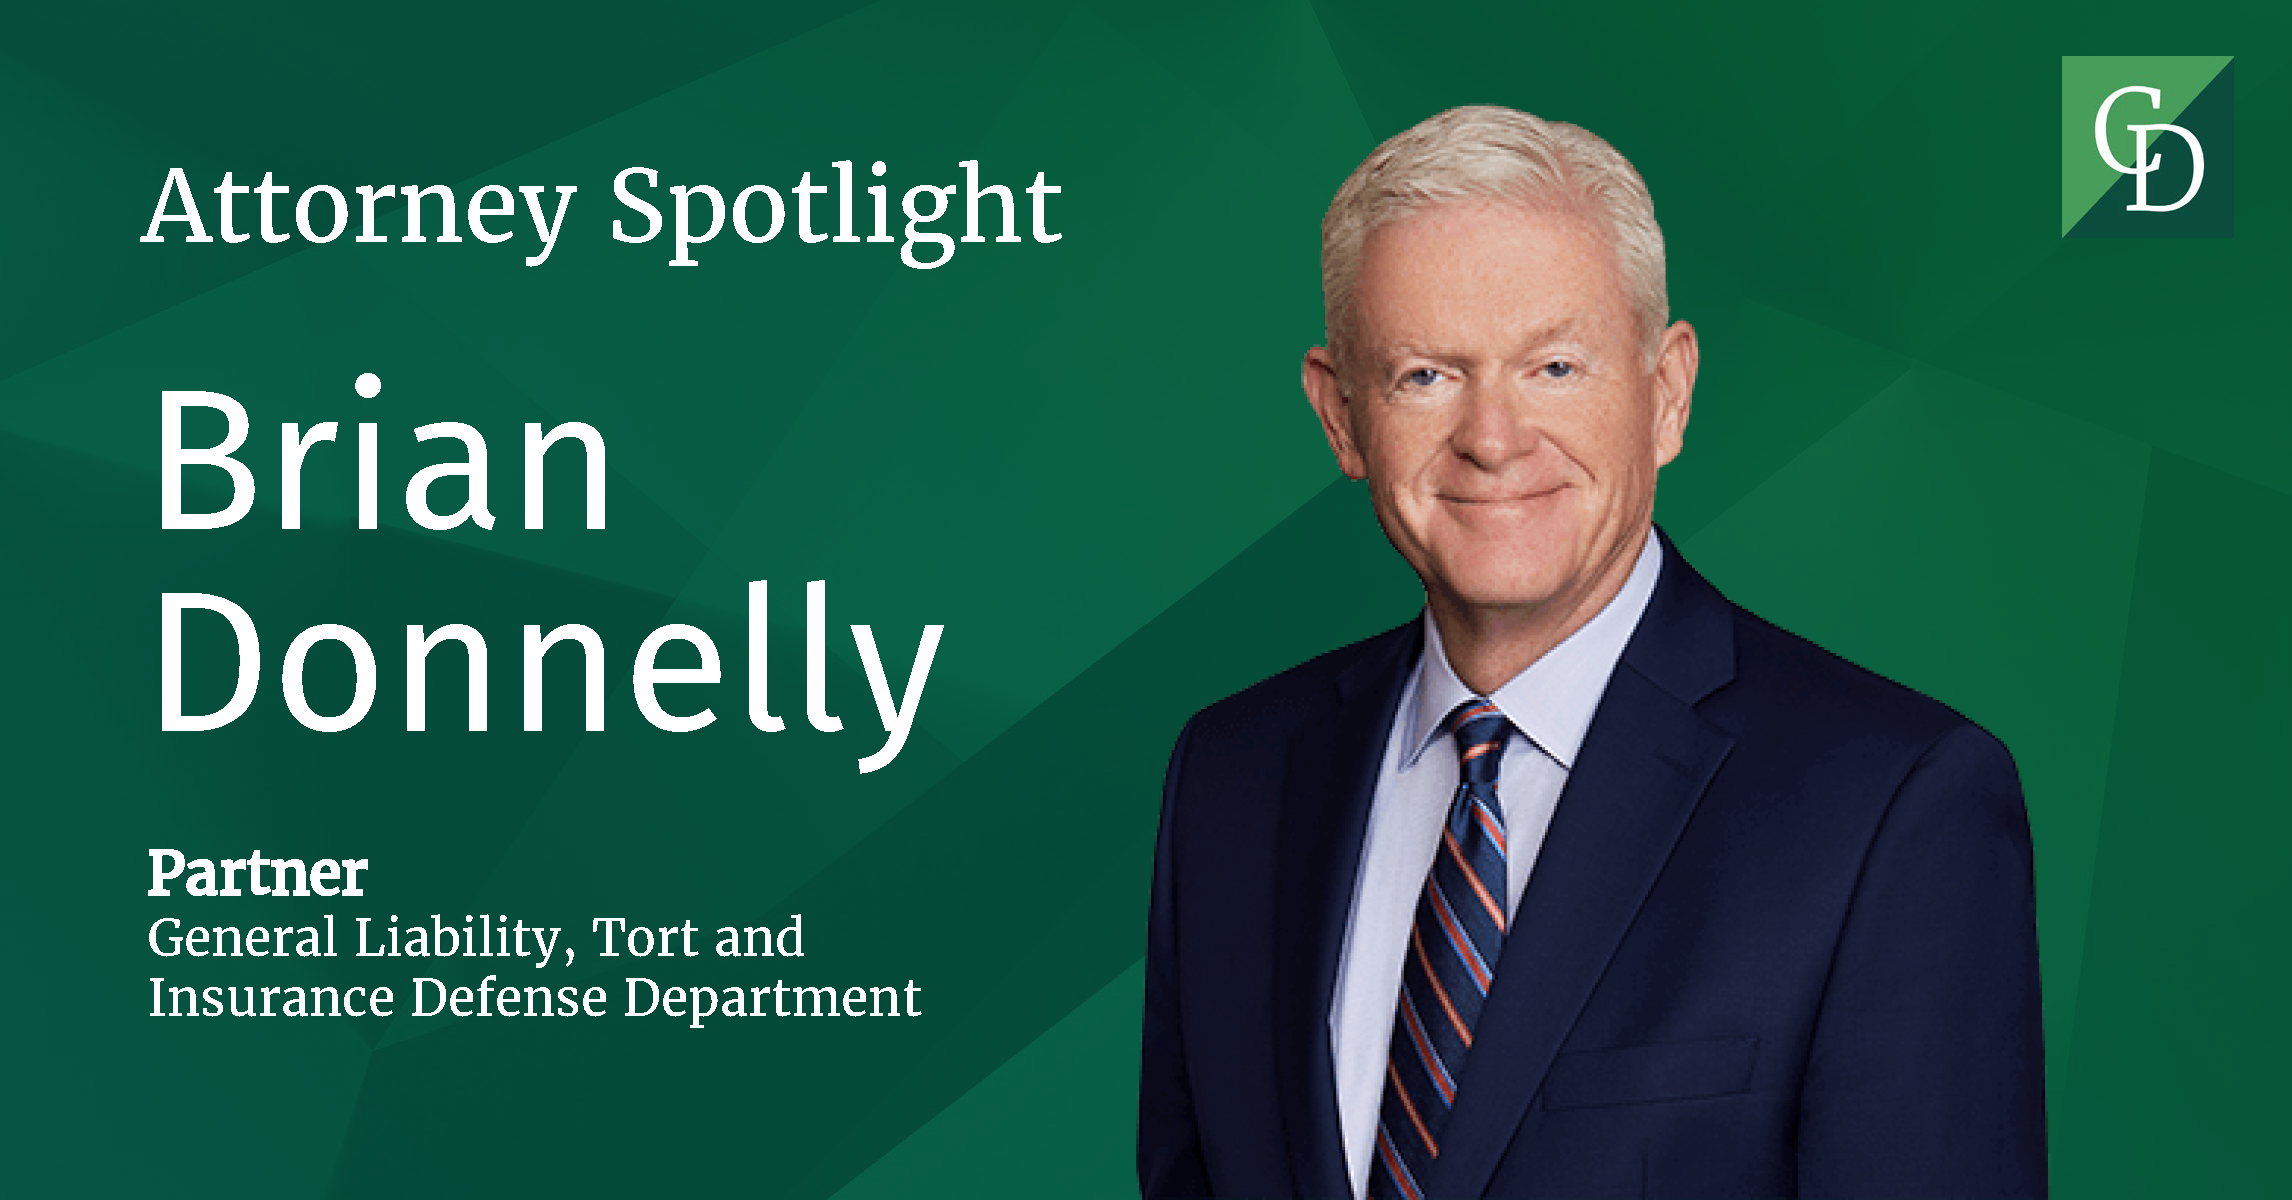 Attorney Spotlight: Brian Donnelly - Cullen and Dykman LLP